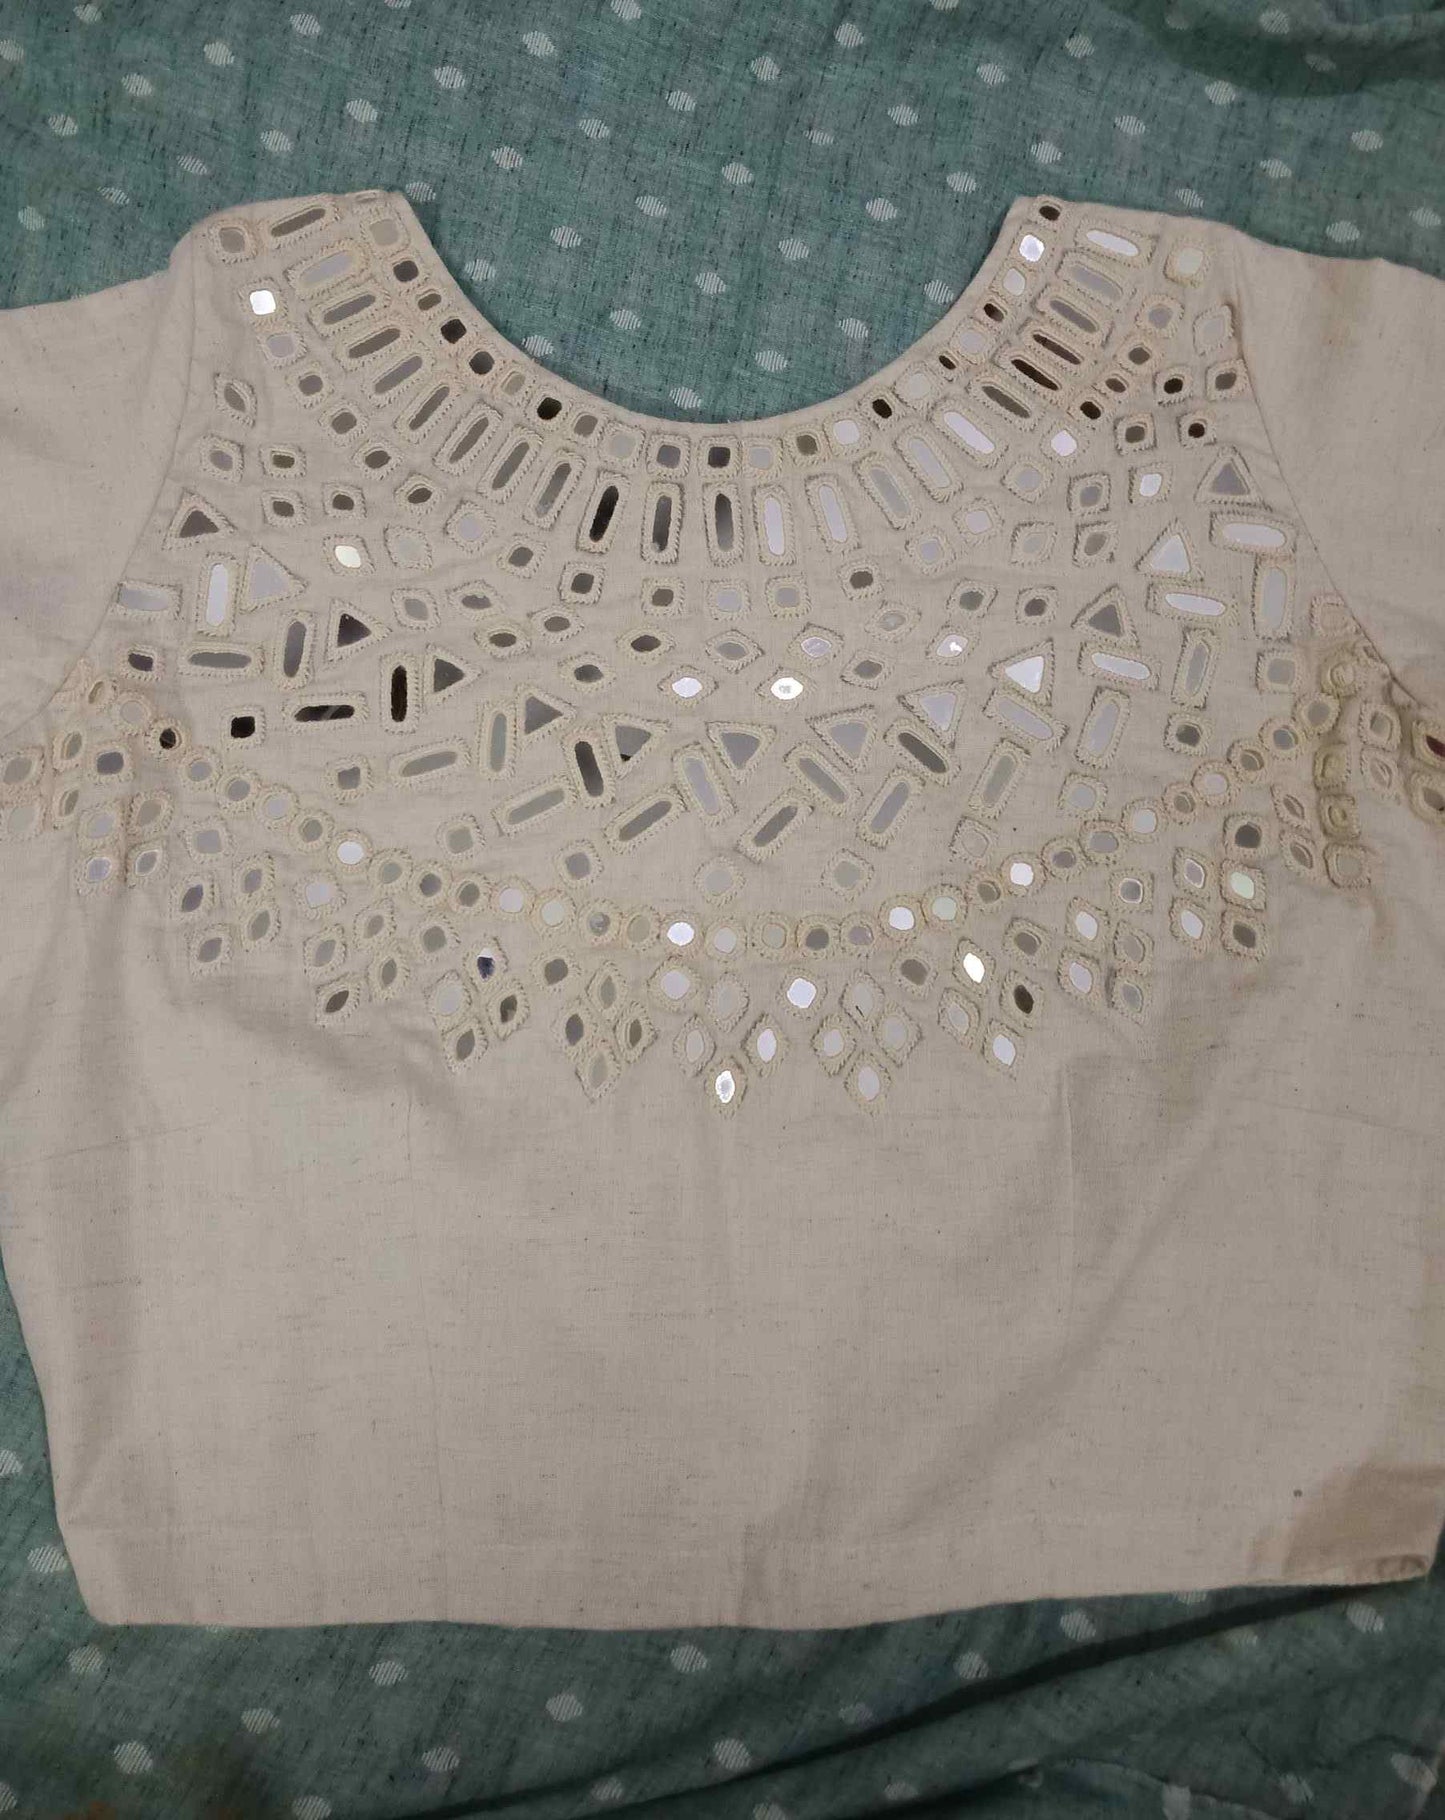 Ivory Blouse with Hand Embroidered Mirror Work